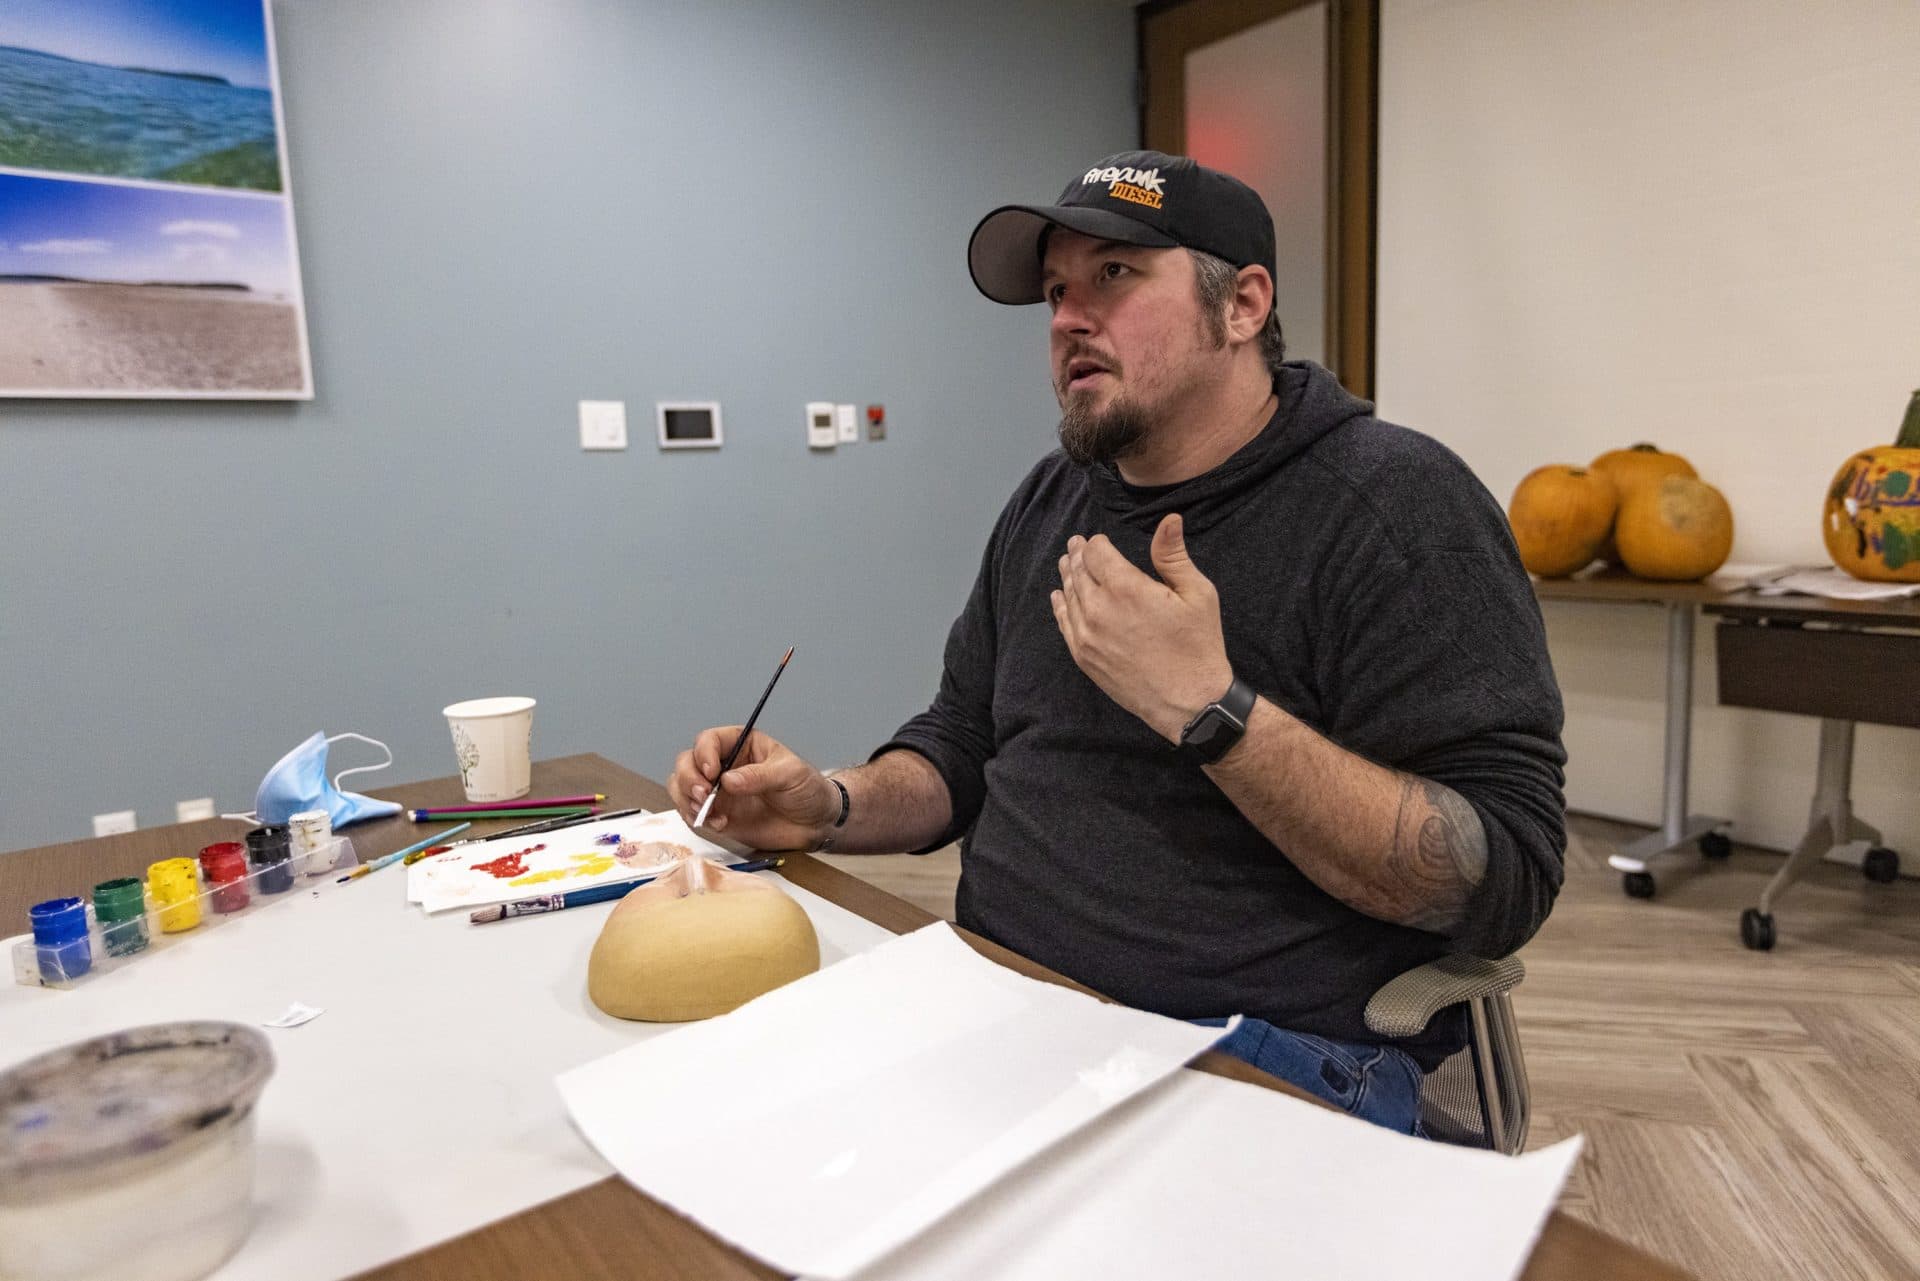 Air Force veteran John Hicks talks with Jennifer Kneeland, expressive art therapist and licensed mental health counselor, as he paints a mask. (Jesse Costa/WBUR)